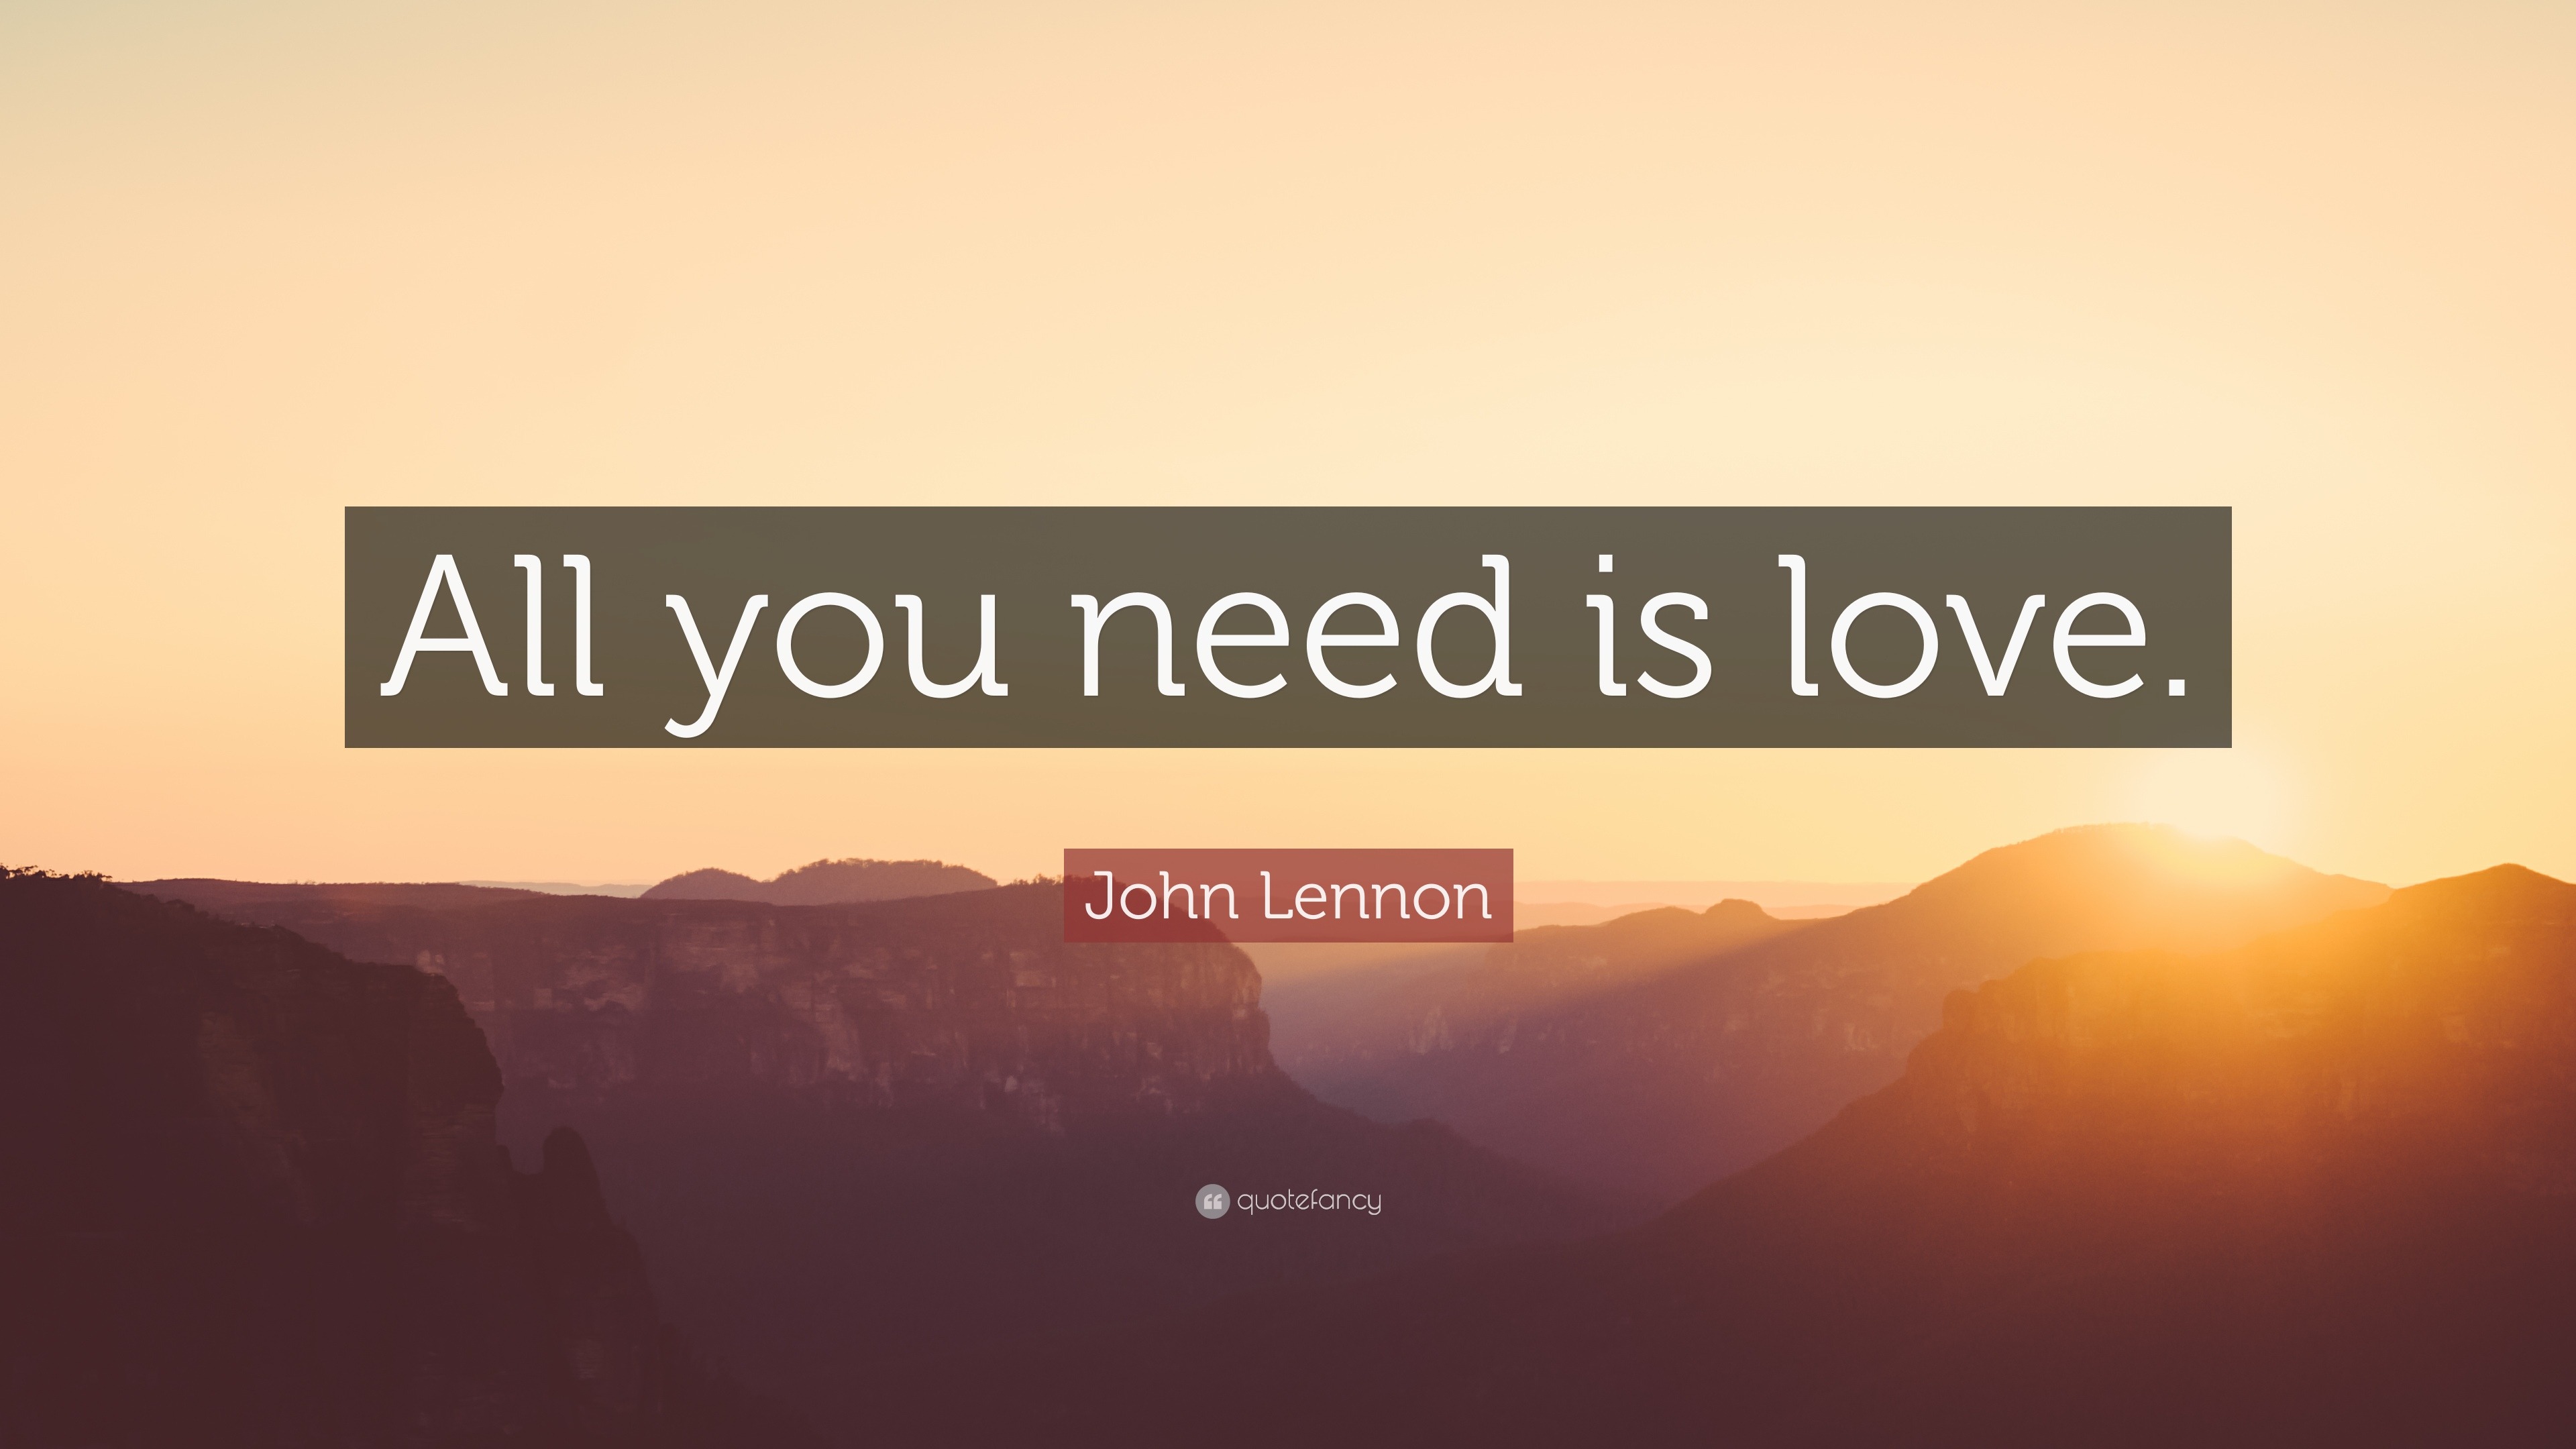 John Lennon Quote: “All you need is